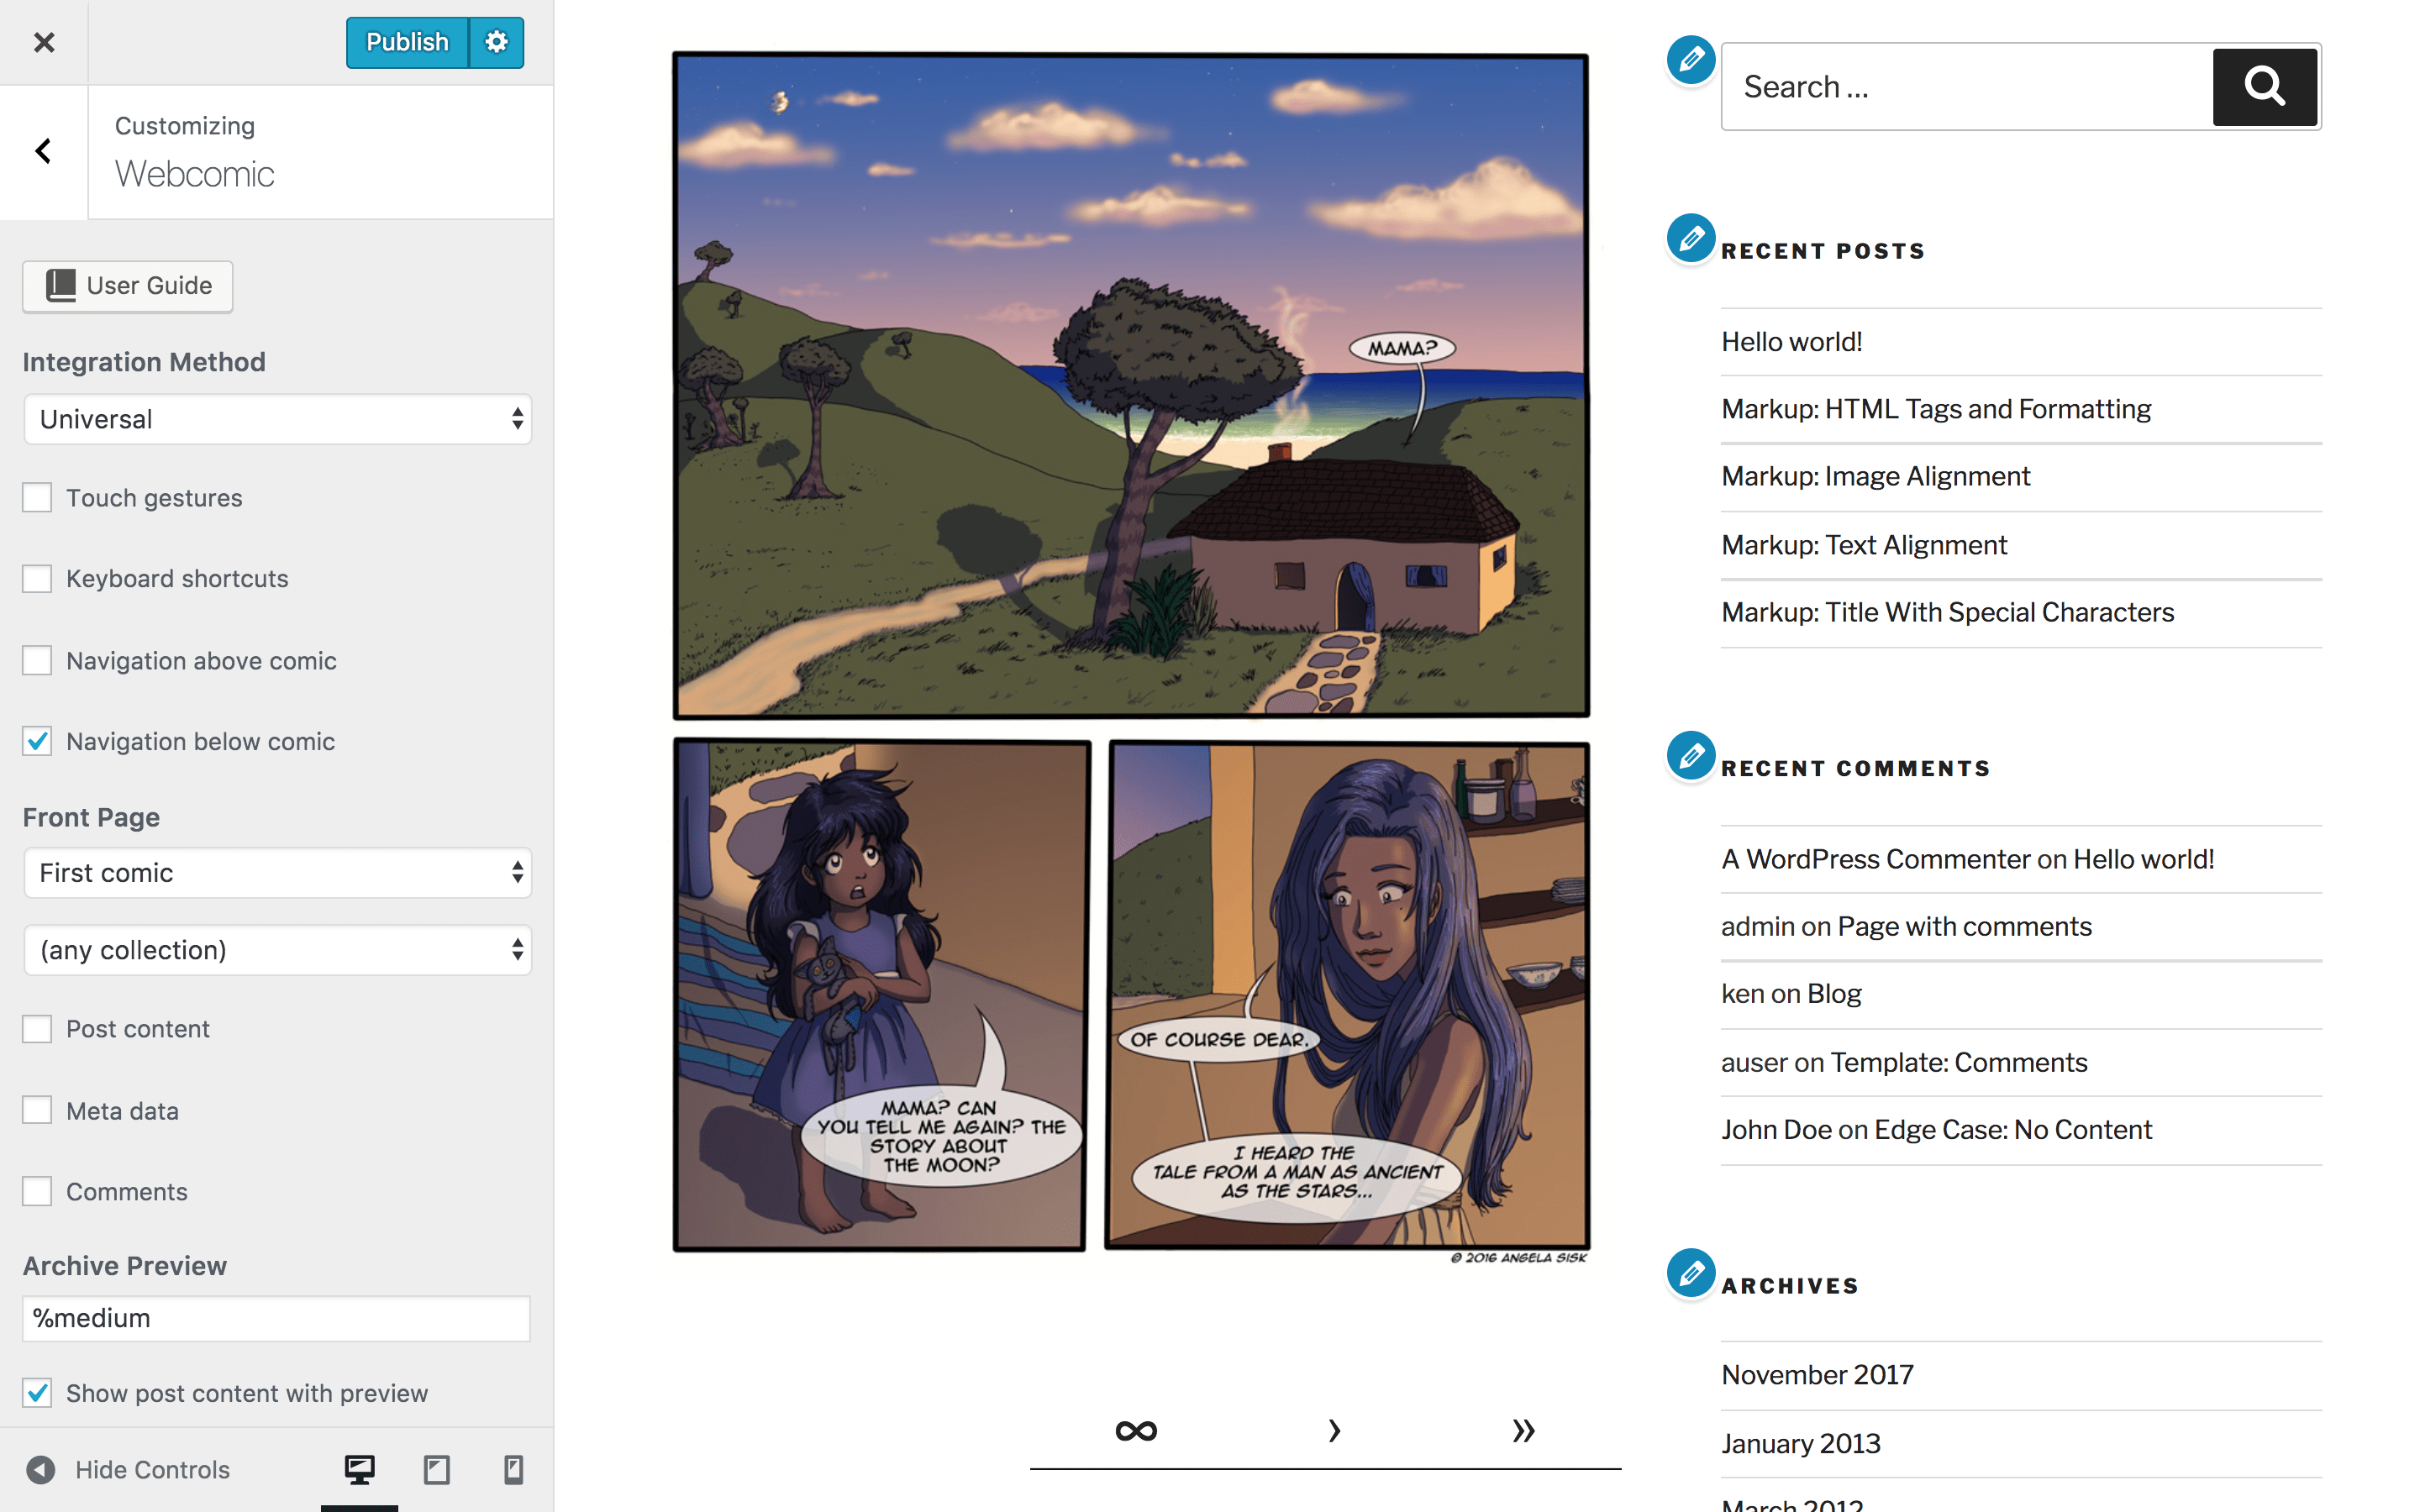 The Webcomic section of the WordPress Customizer.